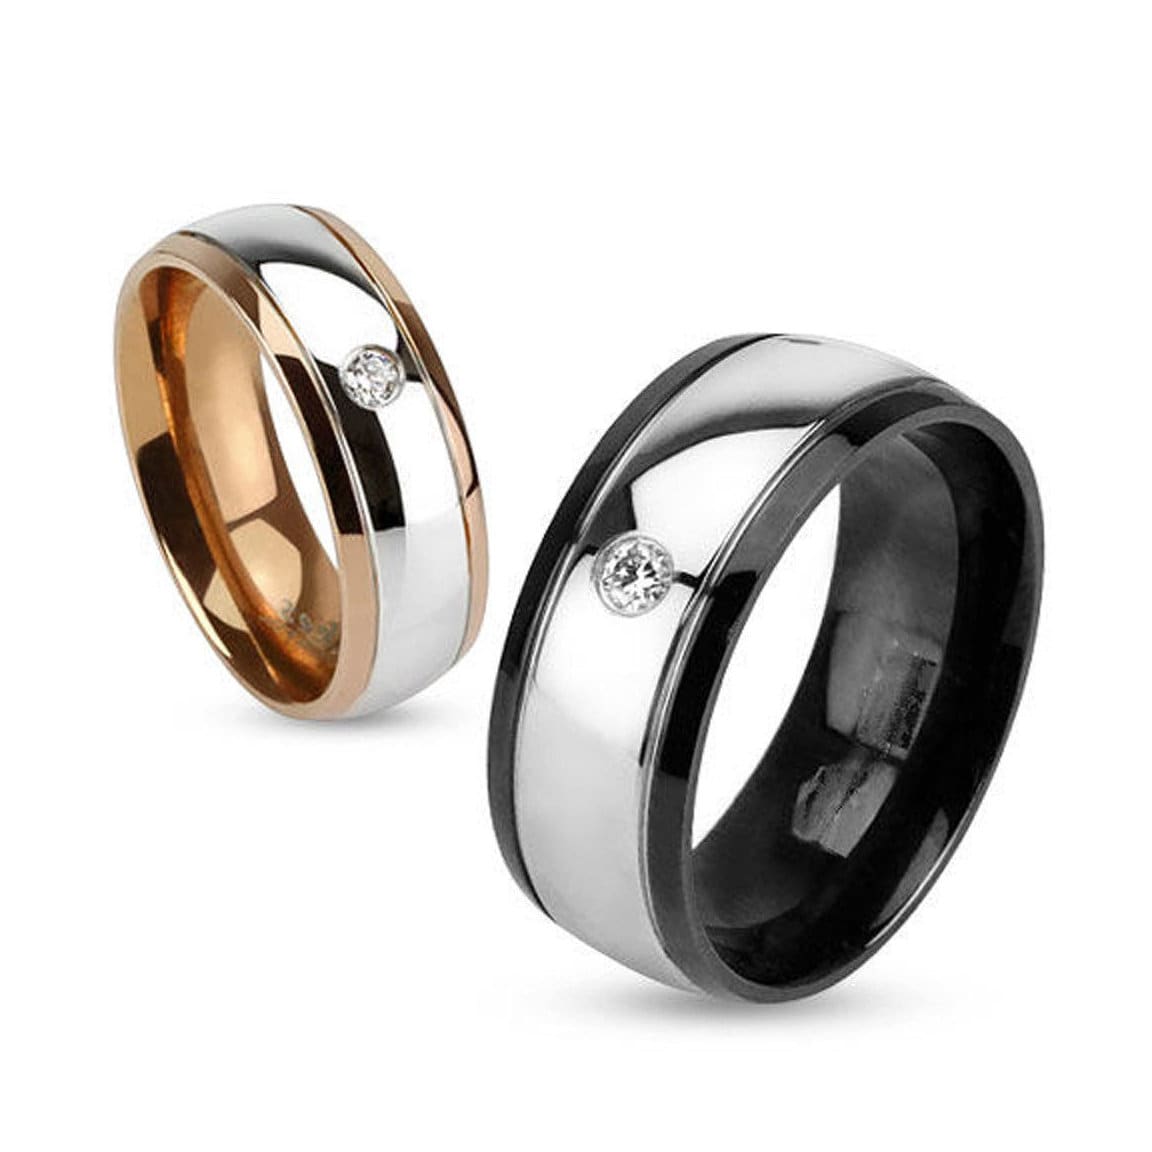 RING TEENAGER MAN WOMAN STEEL AND PLATE BLACK COUPLE CHEAP NEW 1180 